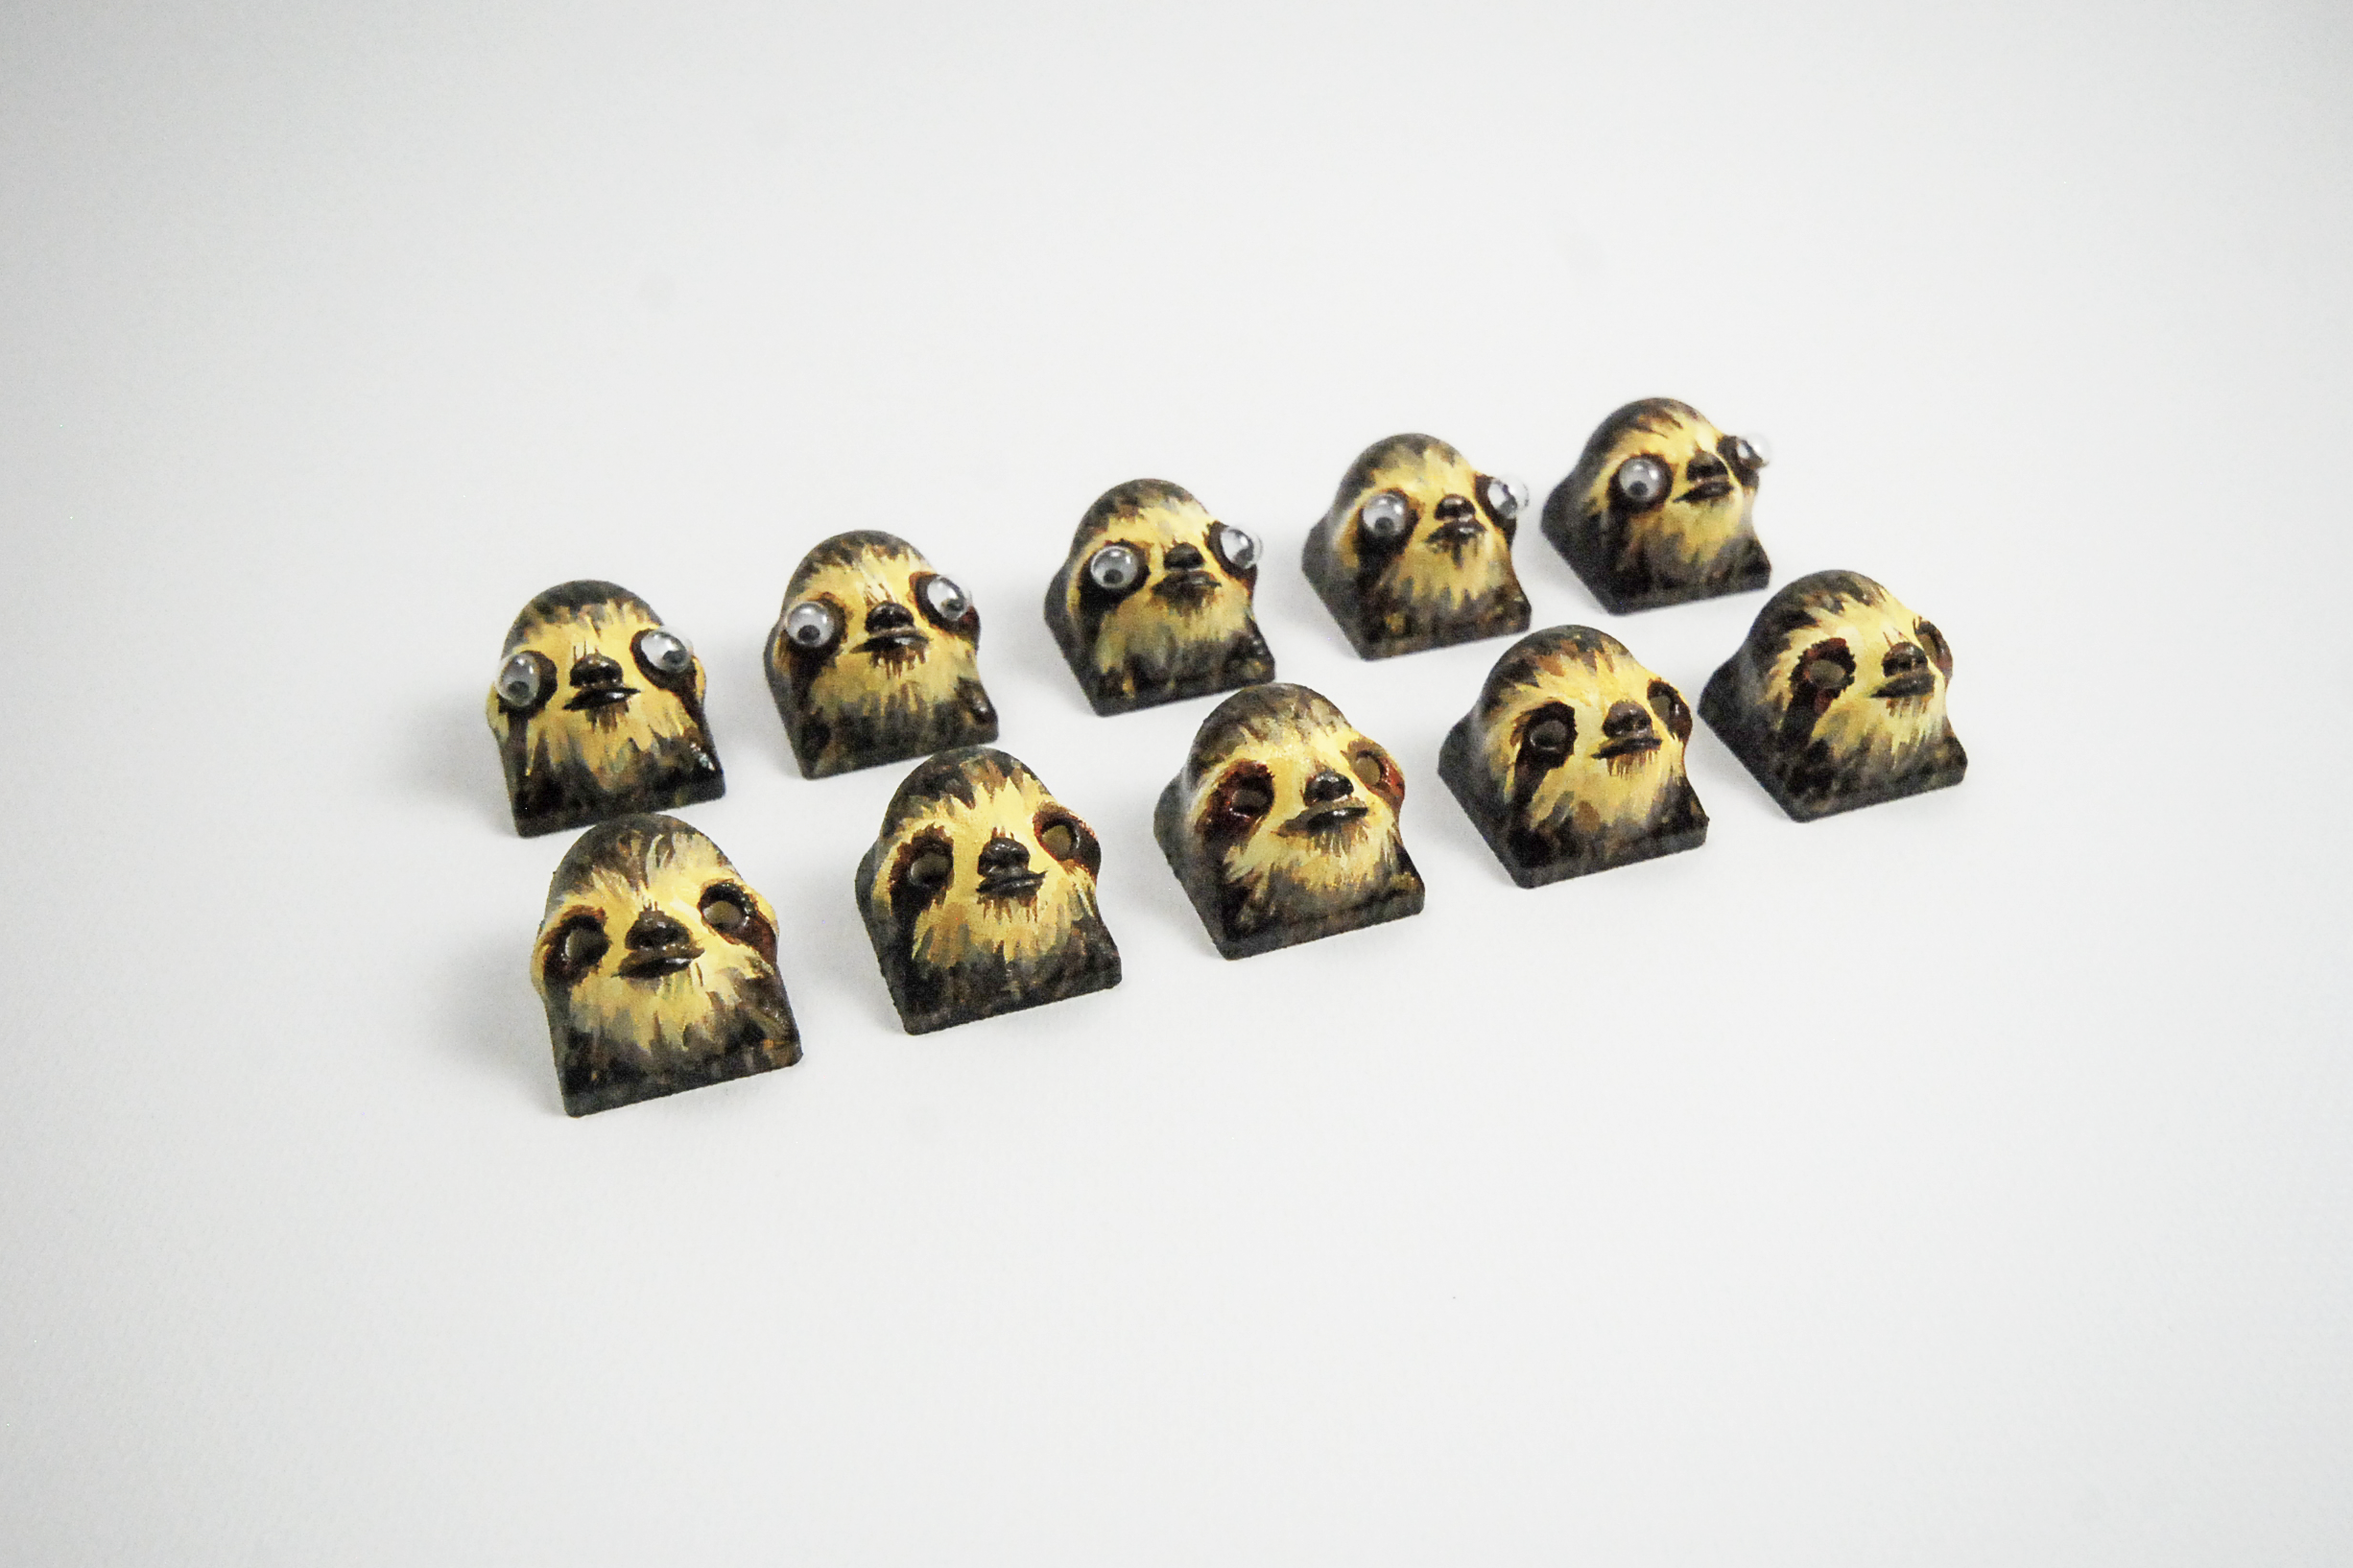 Sloth caps with and without googly eyes